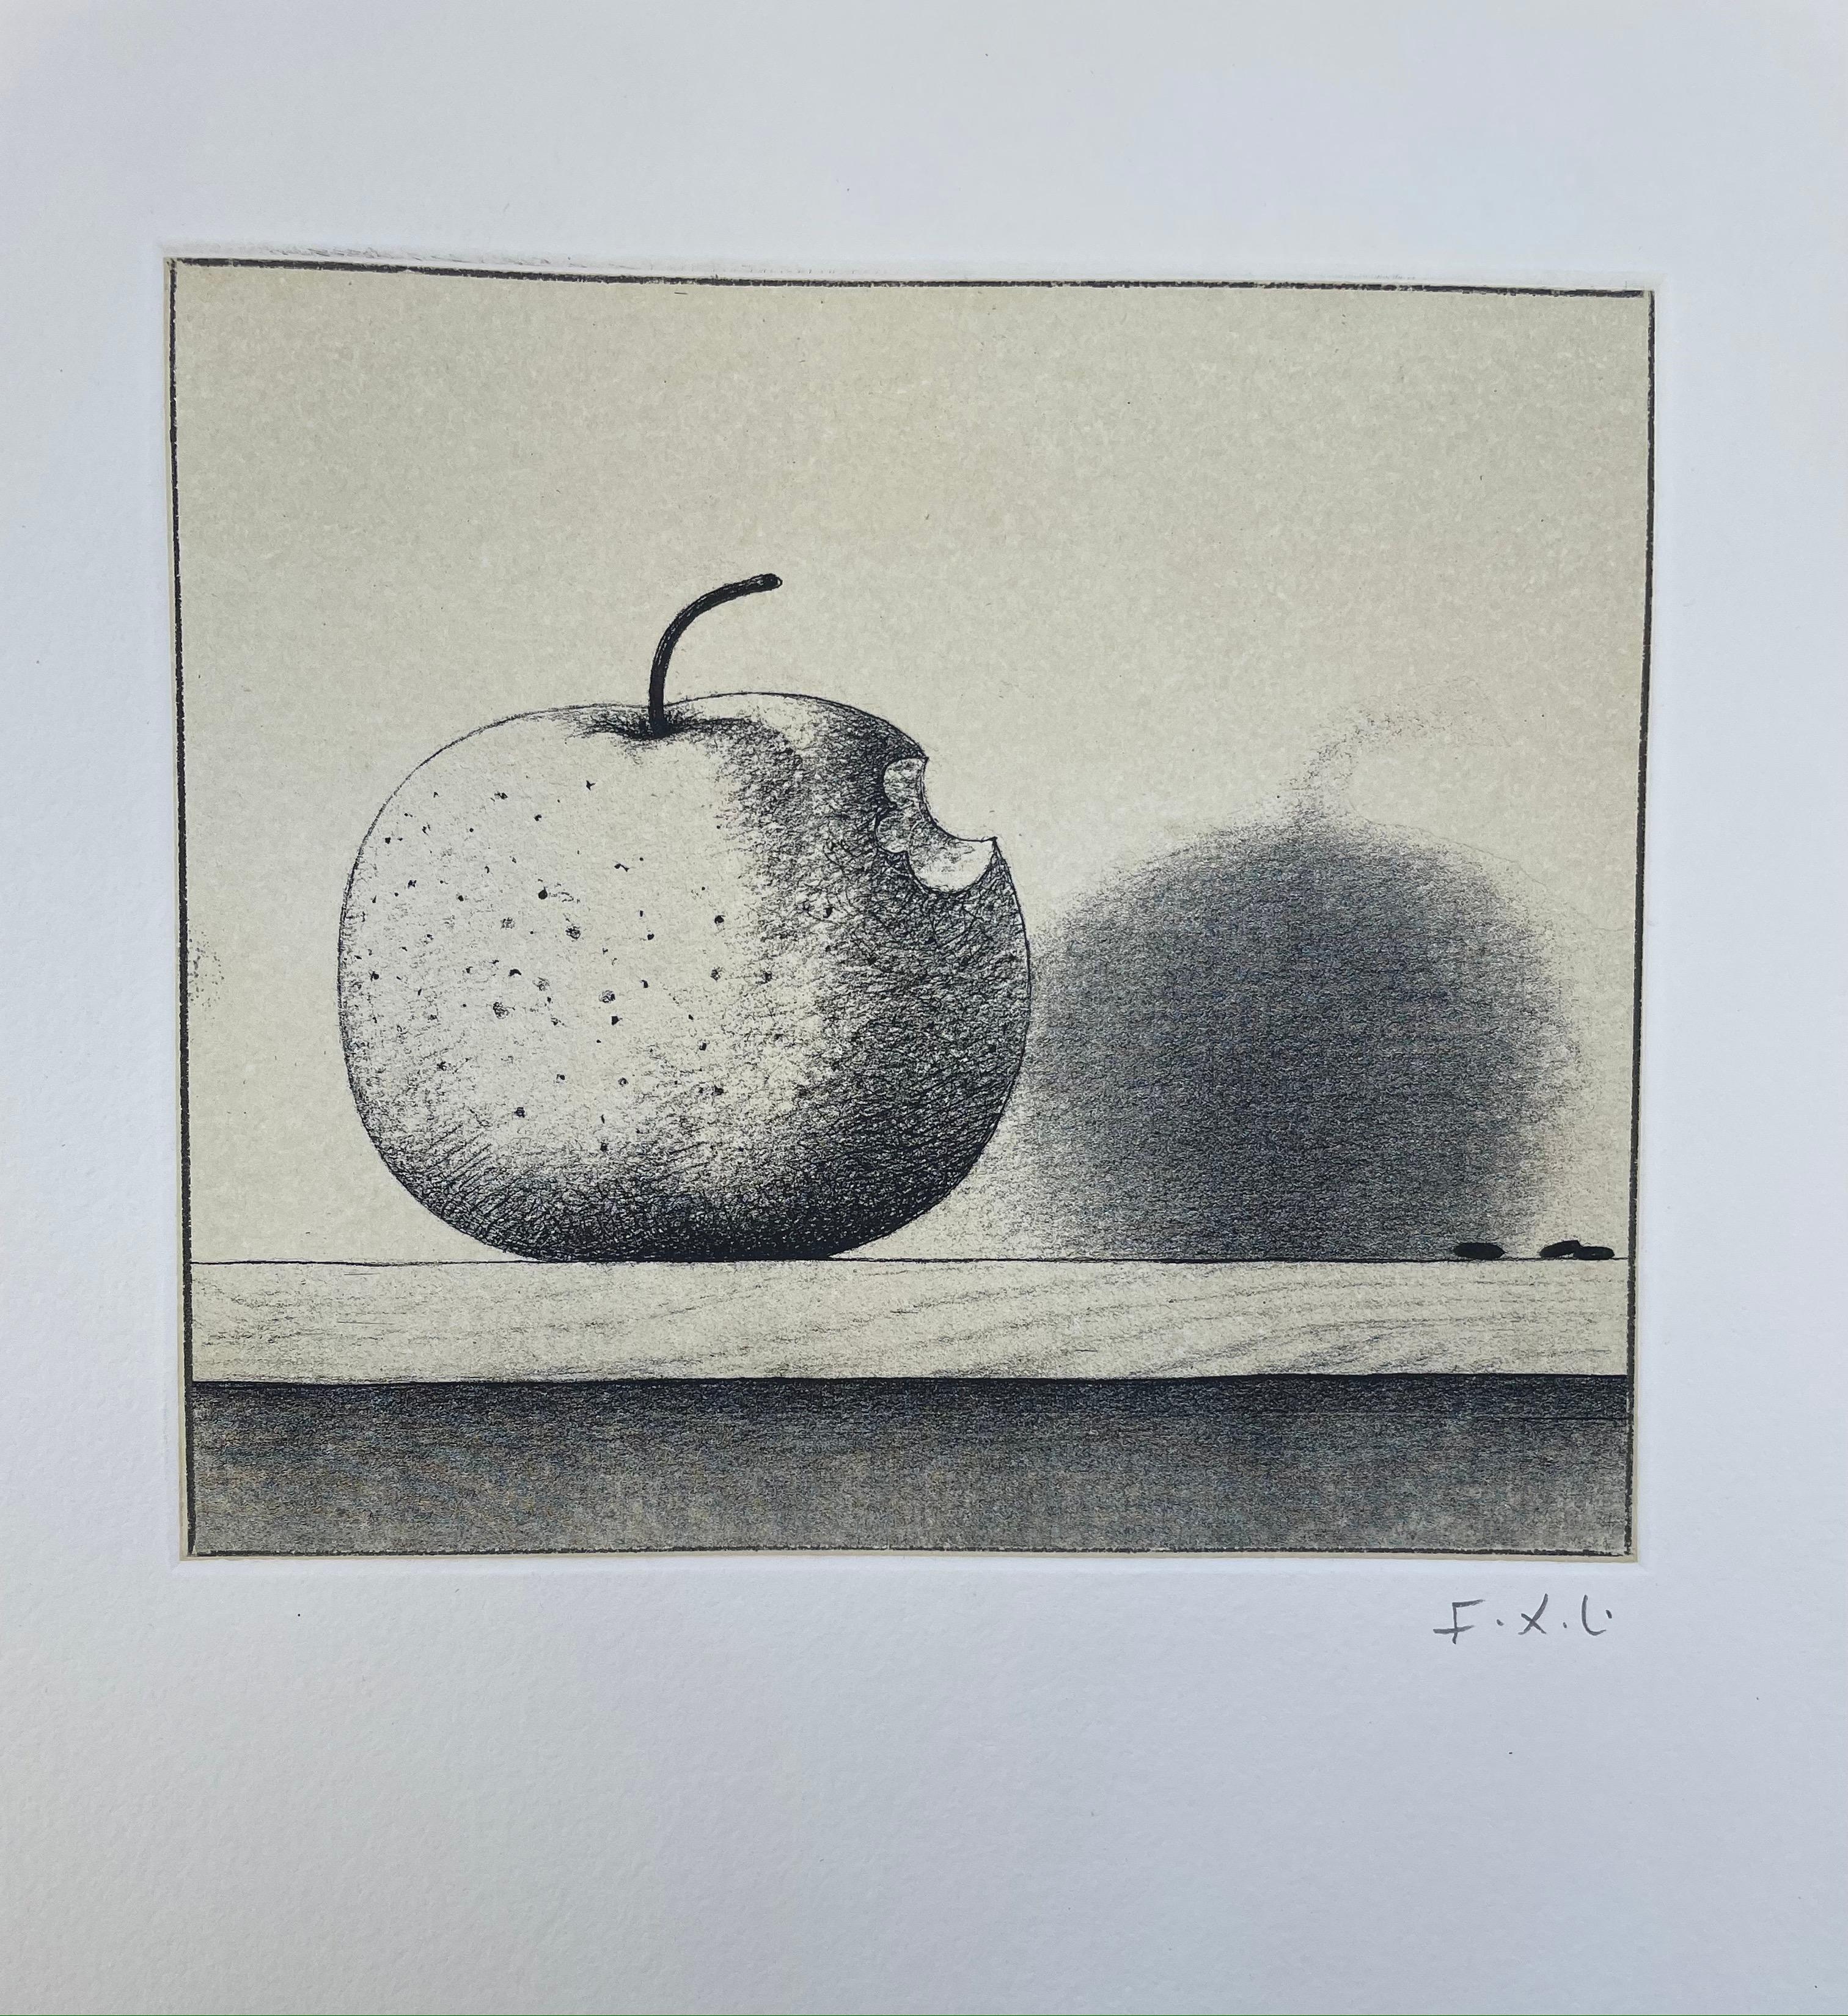 François-Xavier Lalanne (1927-2008) the Apple, 2003
Techniques : heliogravure on paper, hand signed in pencil by François Xavier Lalanne, in perfect condition 
Dimensions of the paper : 38 x 28 cm (14,96 x 11 inches) 
Dimensions of the print